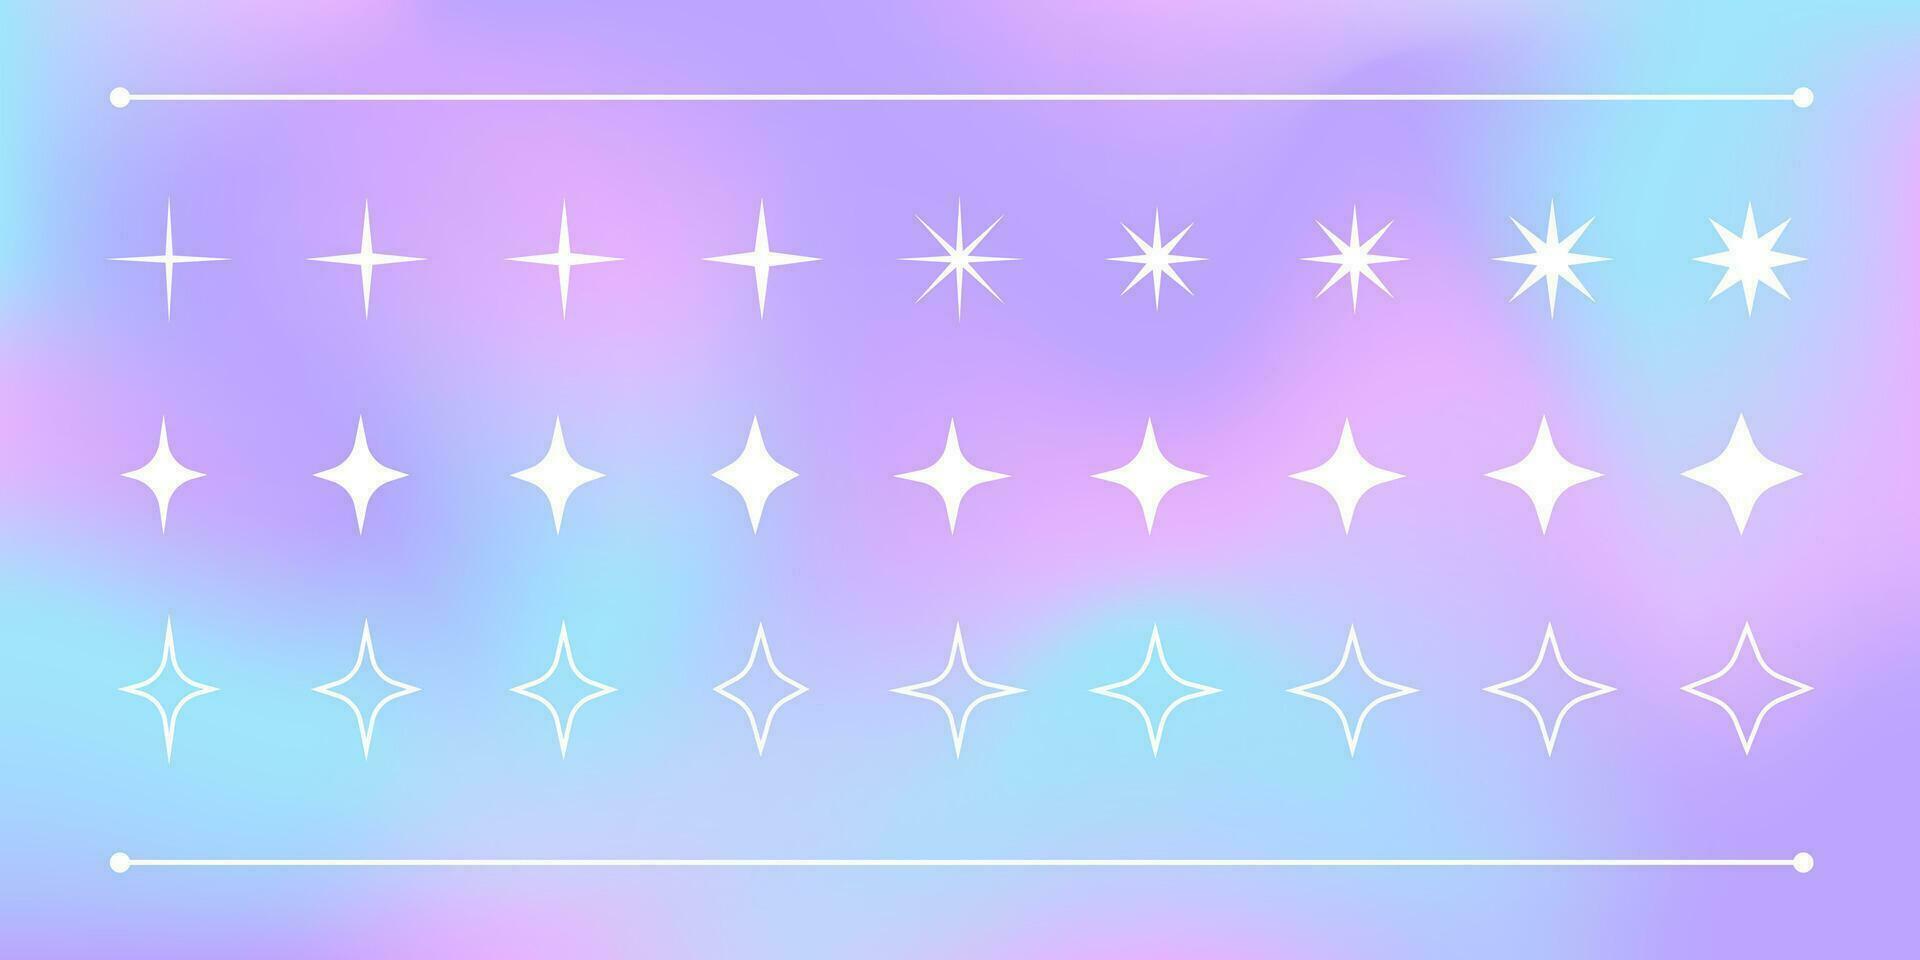 Y2K trendy star shapes, signs and symbols, millennial abstract elements, collection of retro design shapes on a gradient background. vector